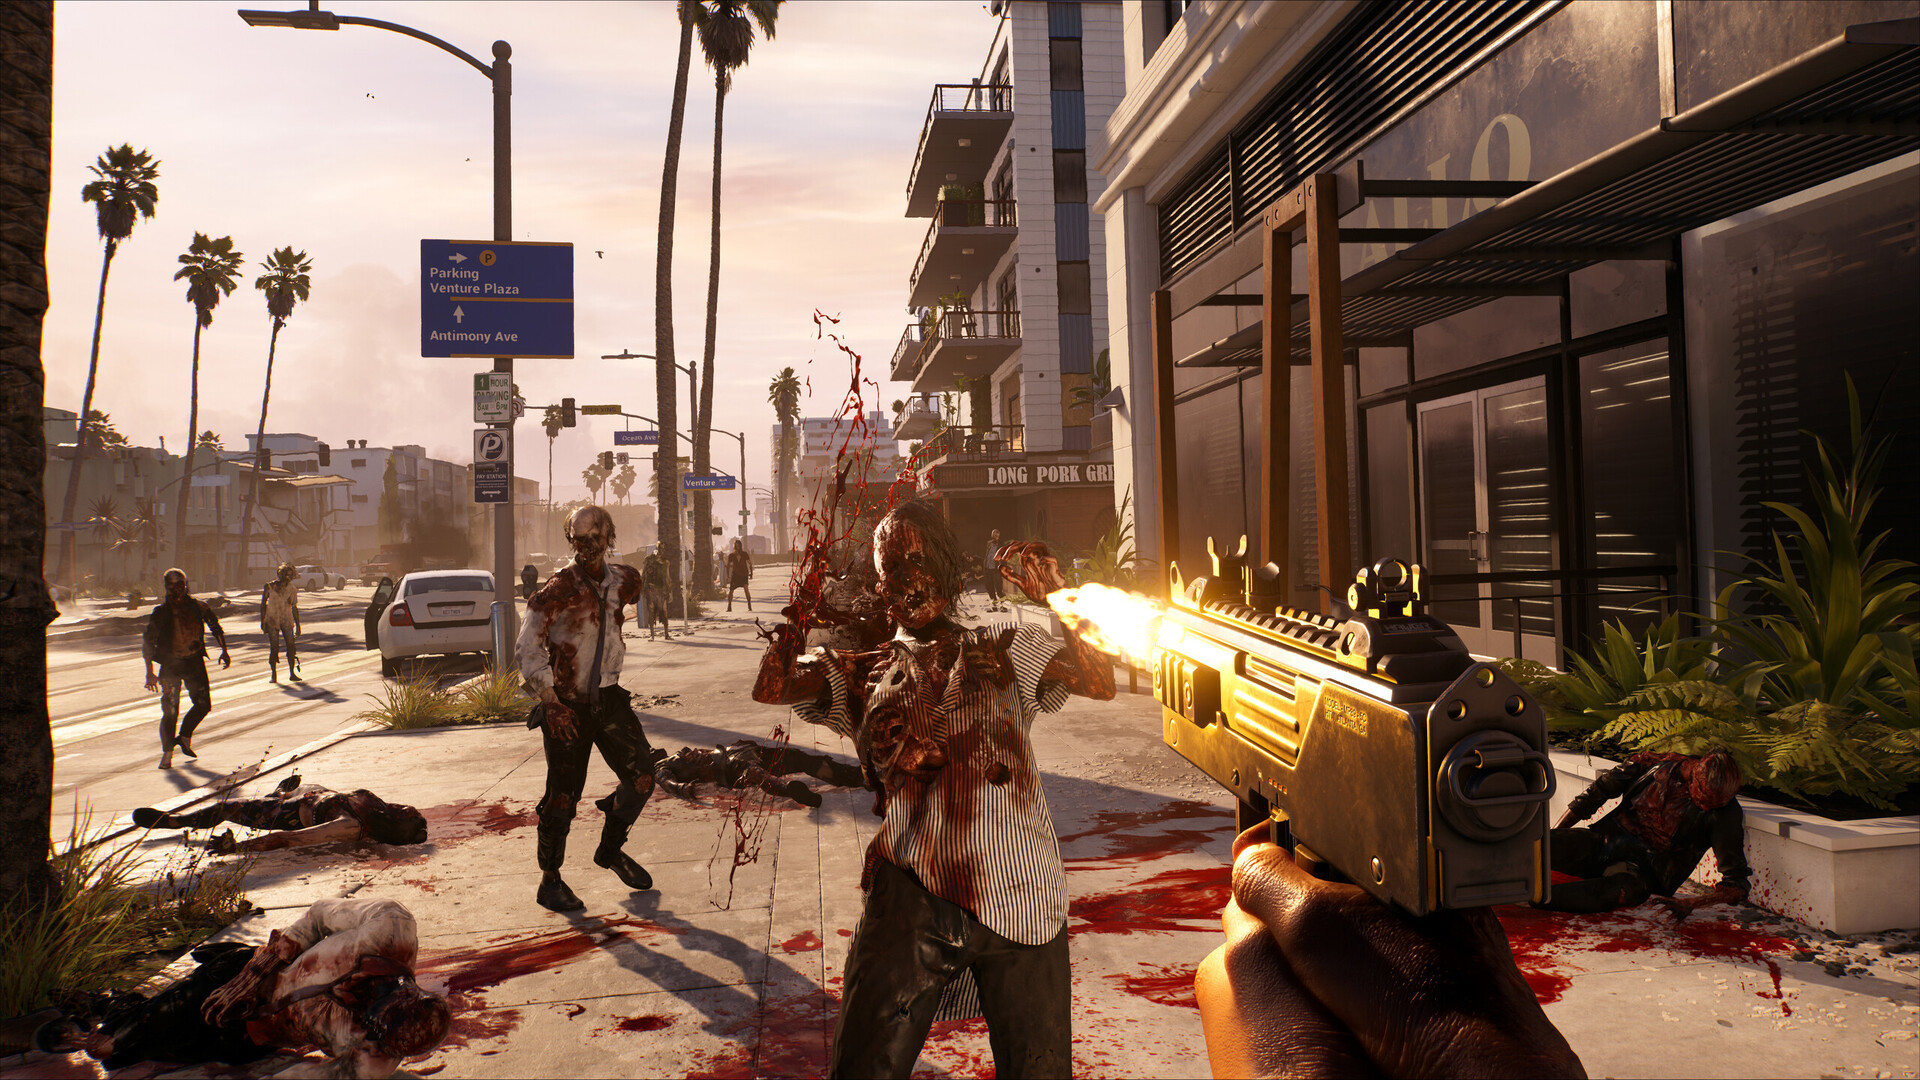 Dead Island 2 PC Requirements Revealed, Next-Gen Consoles 60fps, Crossplay  Not Happening